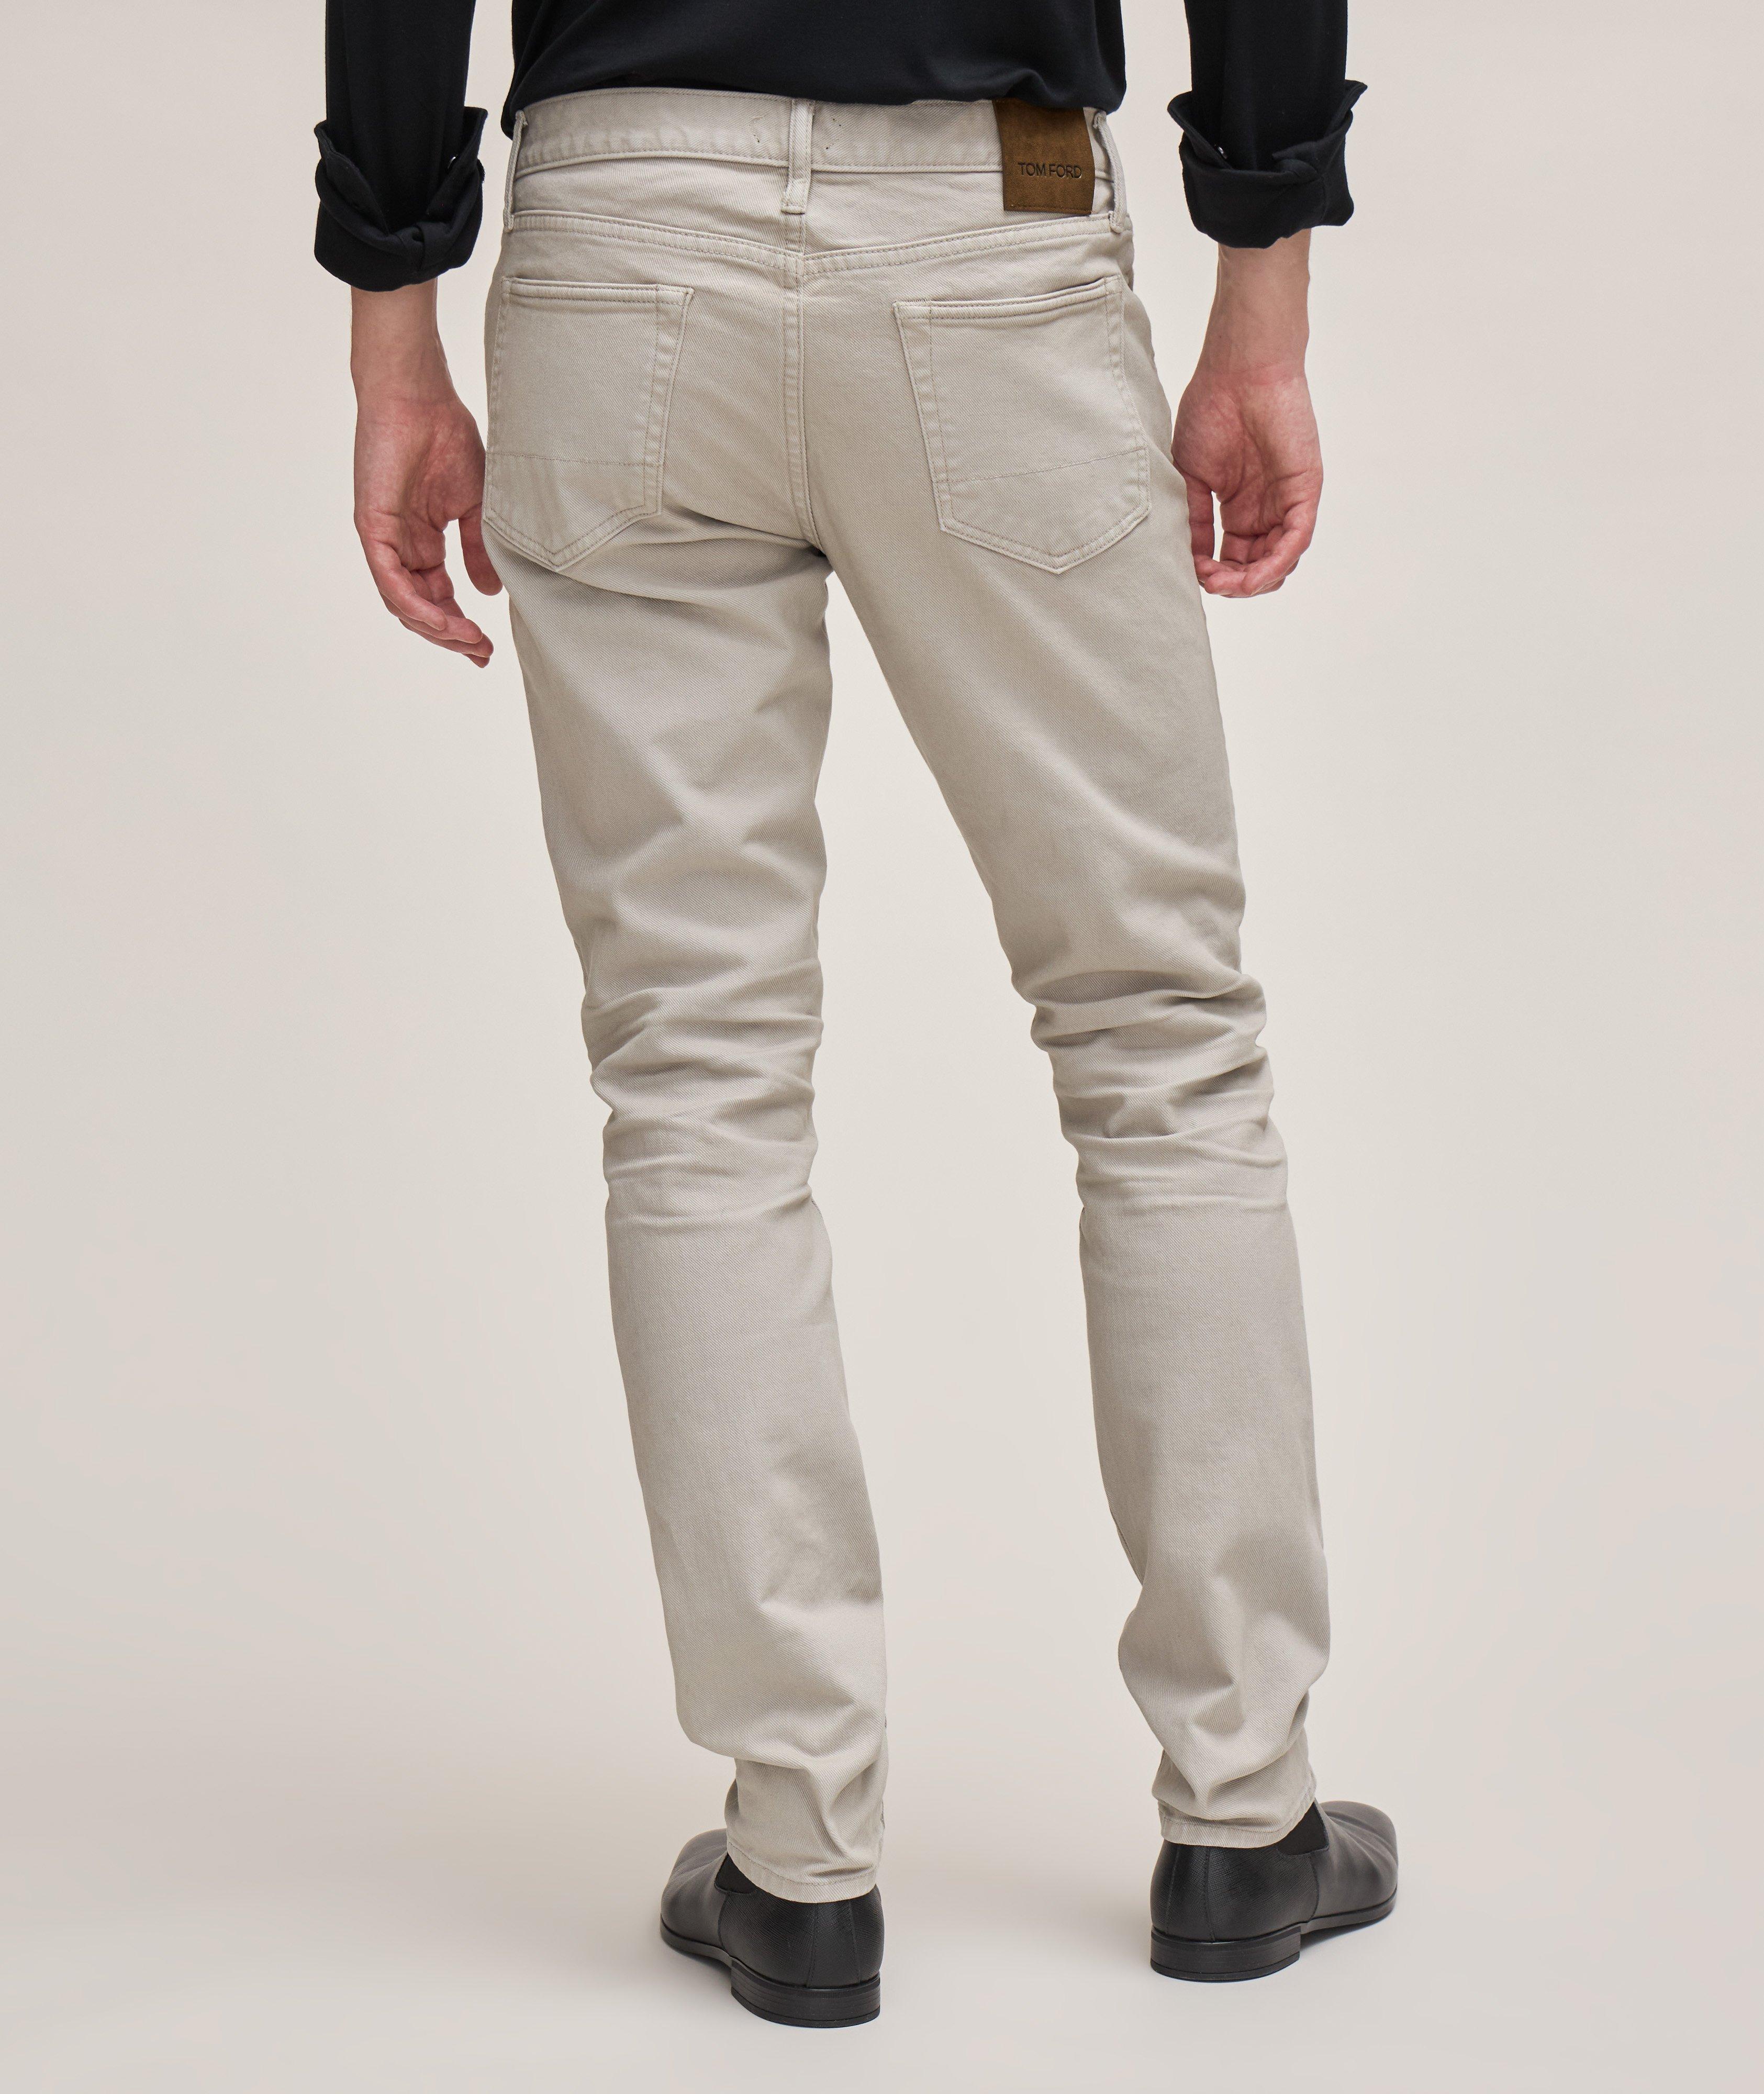 Slim Fit Twill Cotton Jeans image 3